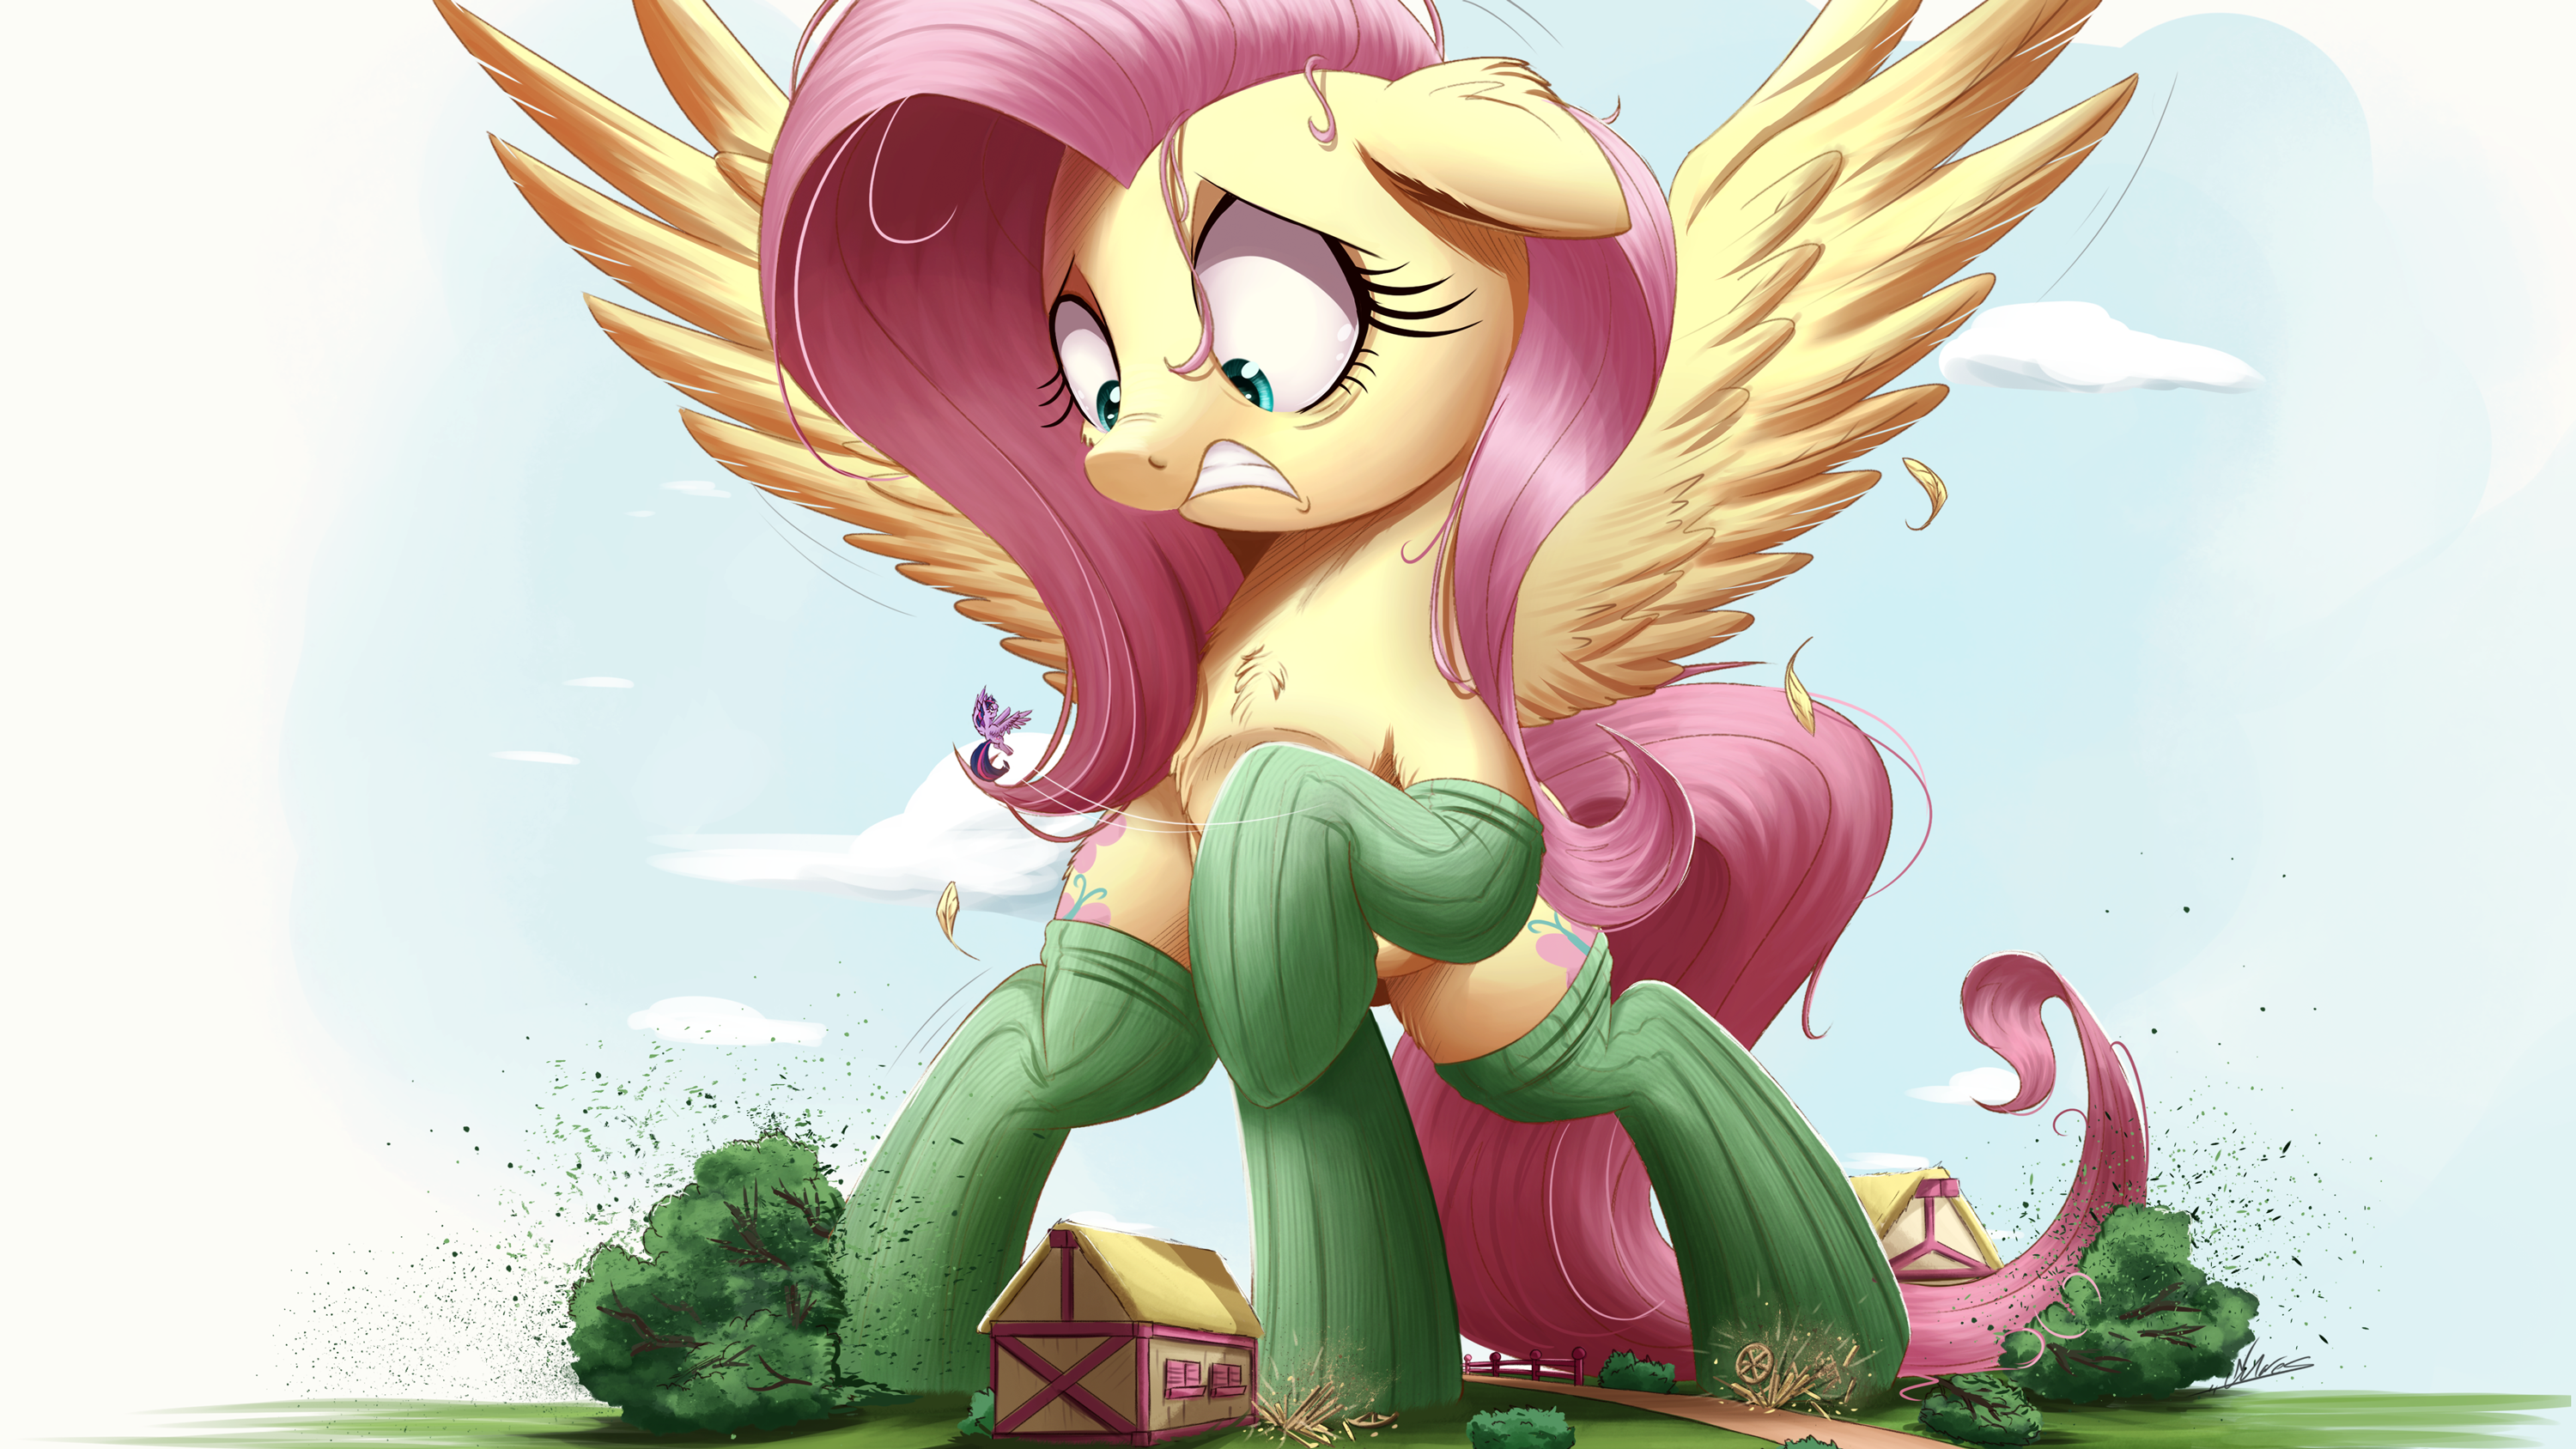 comm___big_flutters_by_ncmares-dayp2rc.p